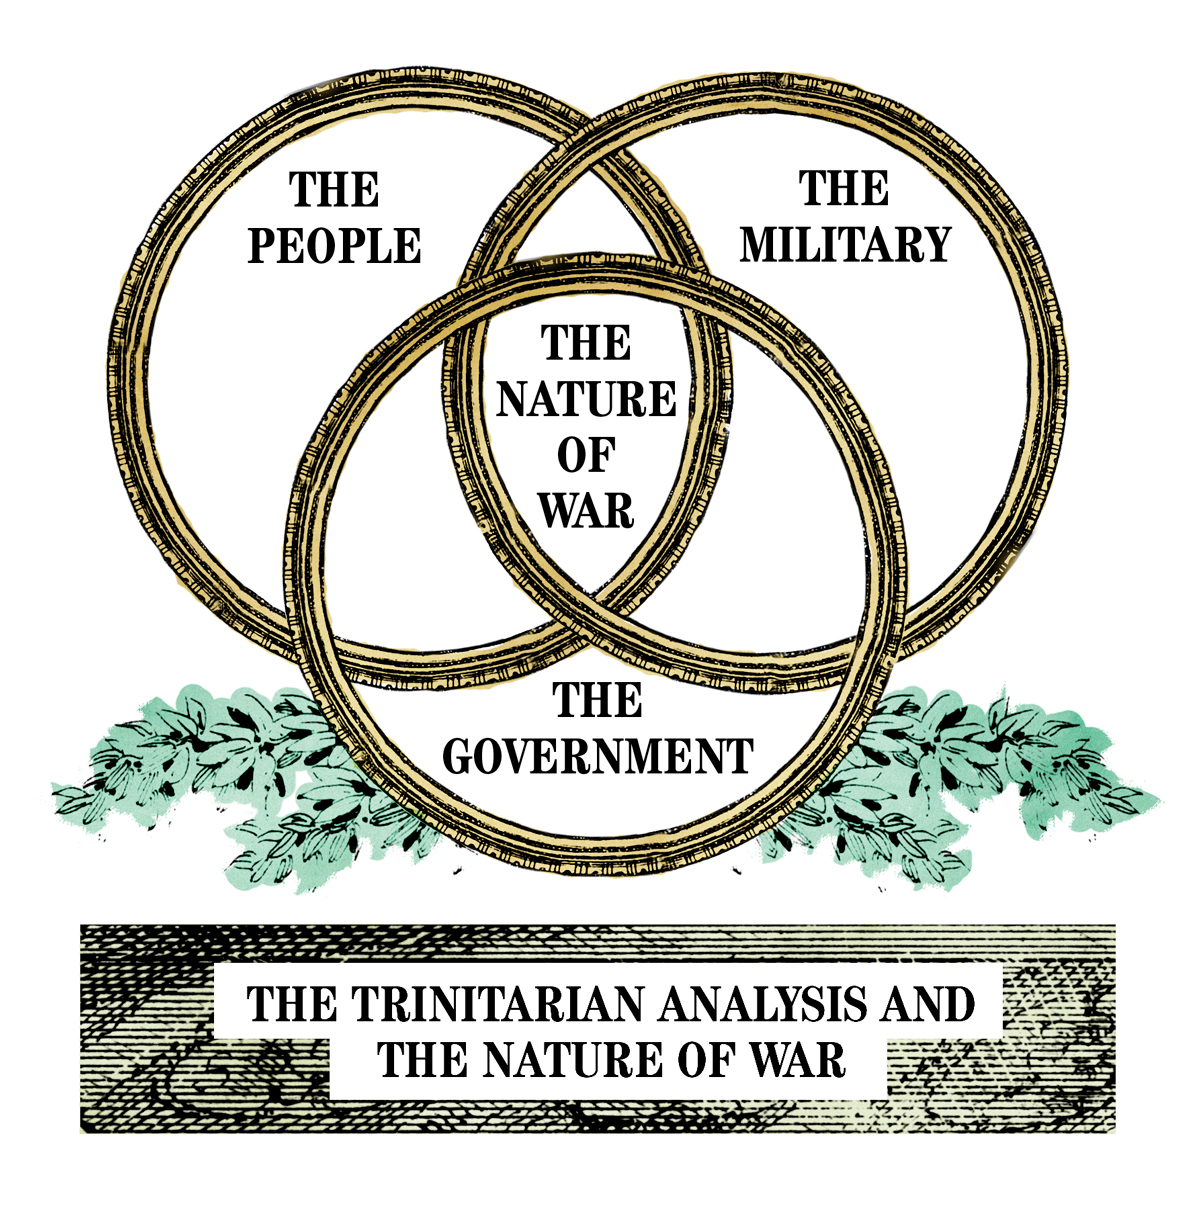 Clausewitz’s “fascinating trinity”: a synthesis of his dialectical analysis of the nature of war. Illustration by unbag.